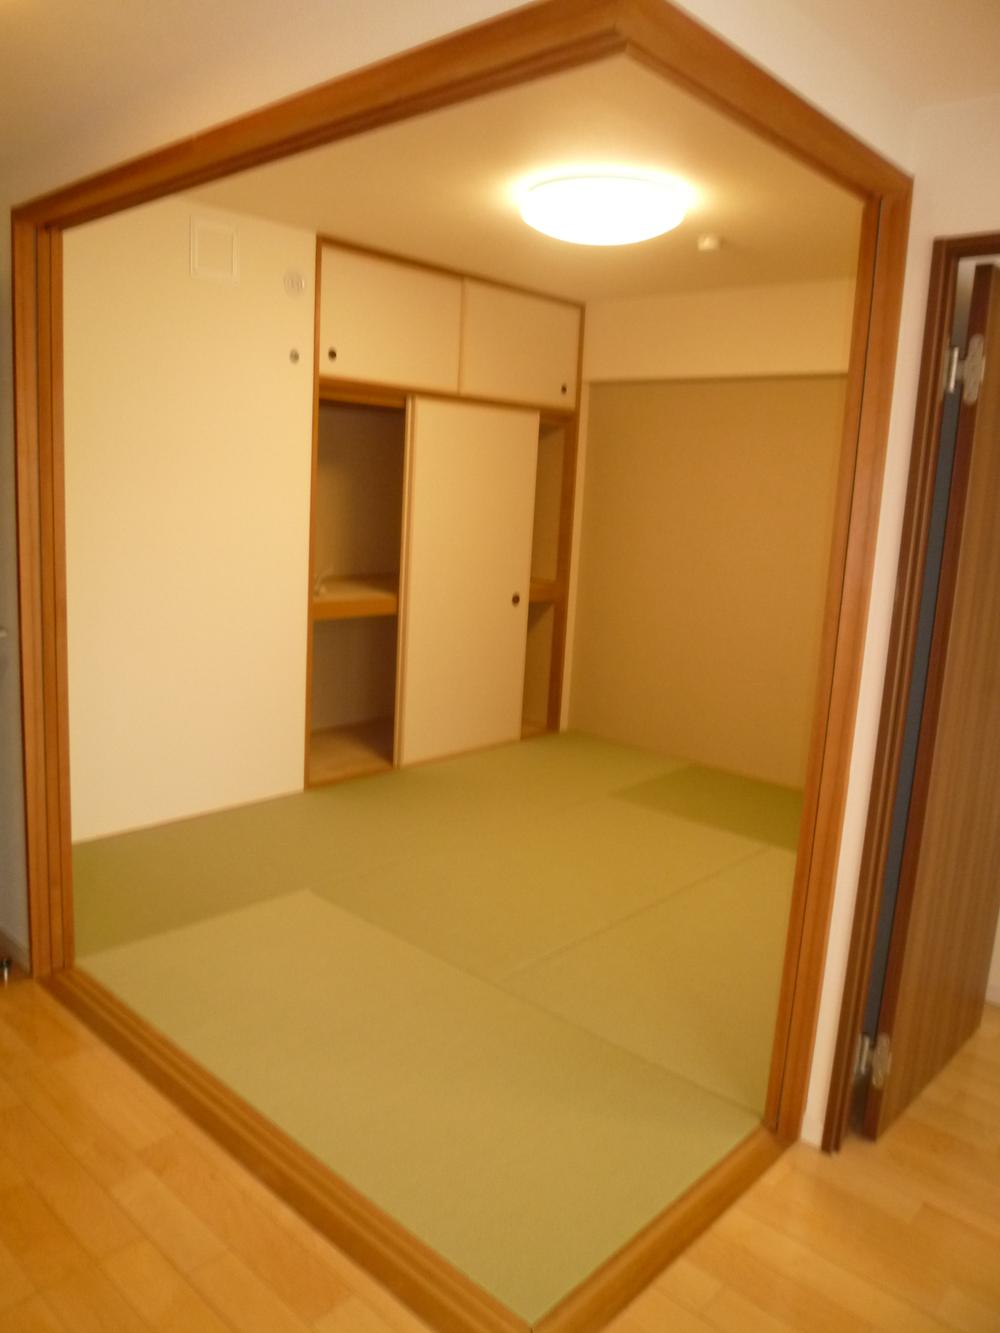 Non-living room. If Akehanate, Together with the LDK Japanese-style room that can be used as a spacious space of 21 tatami mats or more